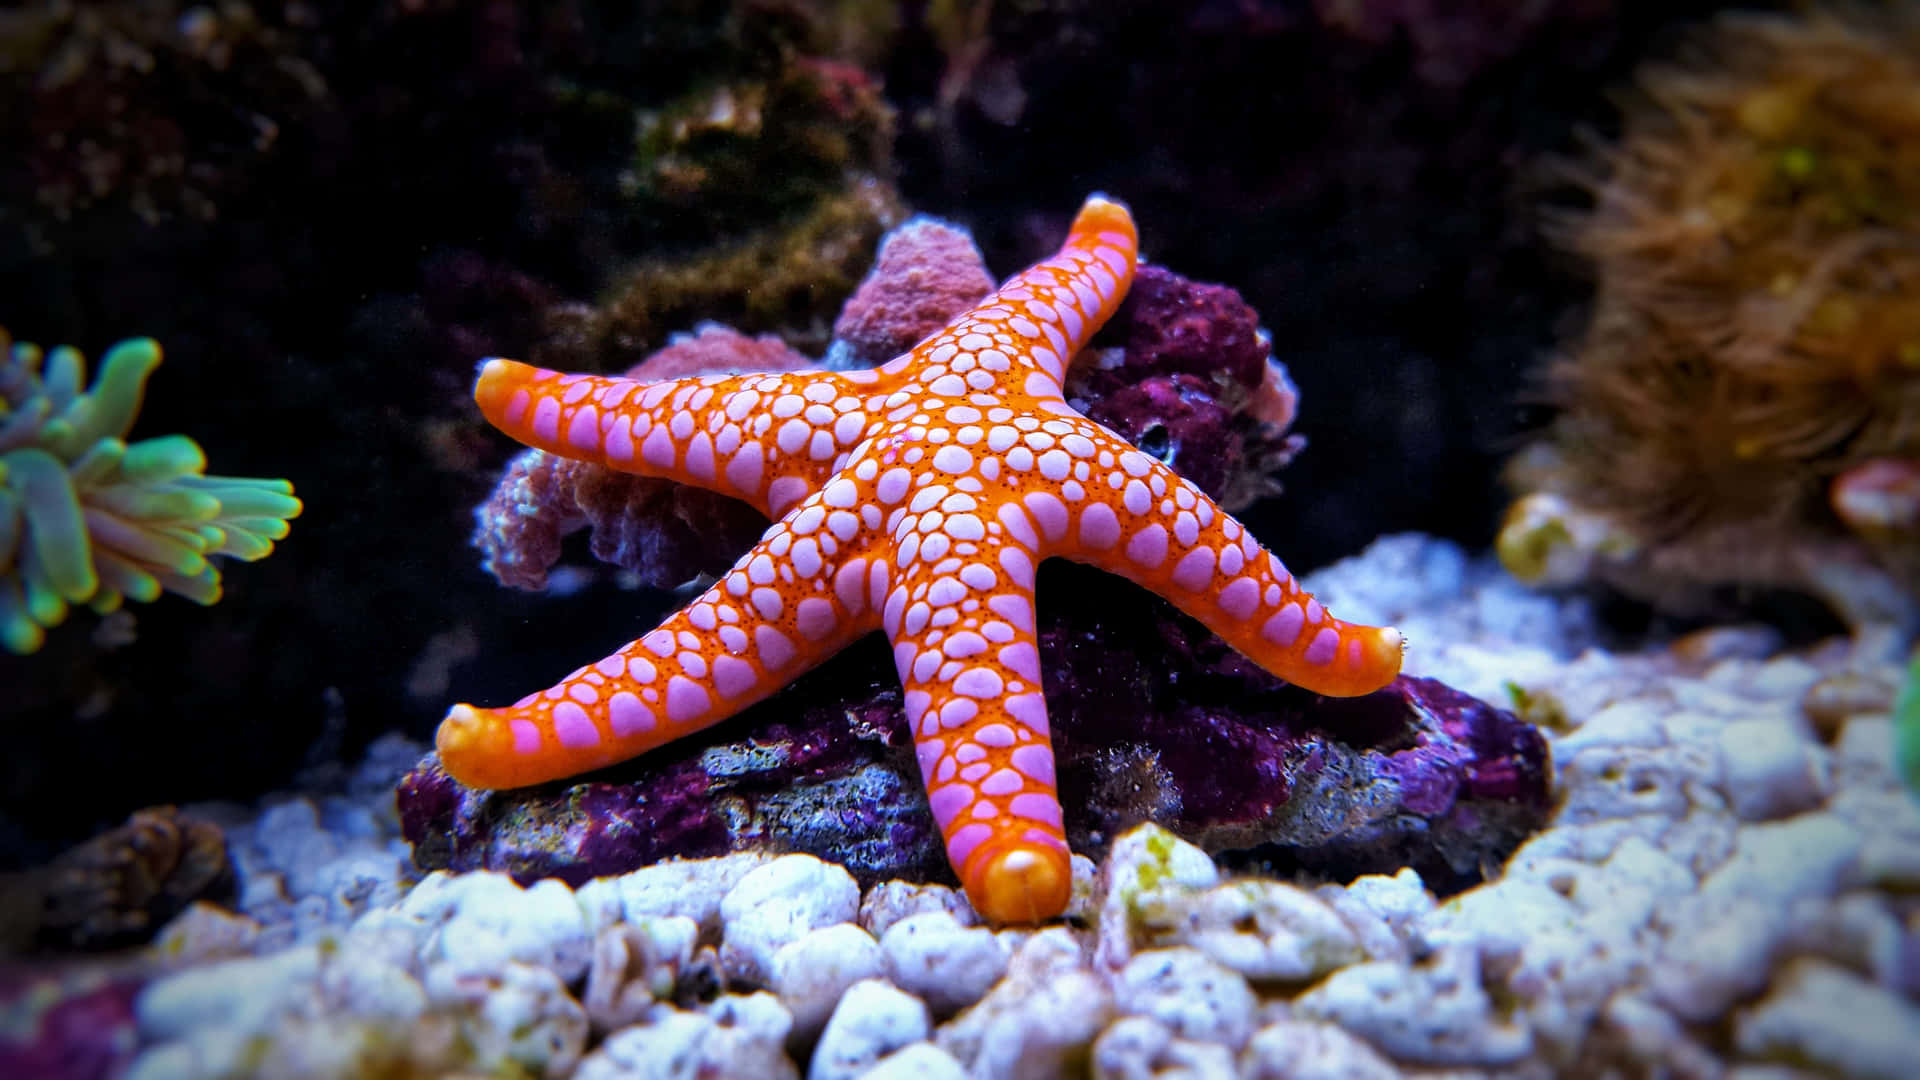 A starfish resting on a beach shore